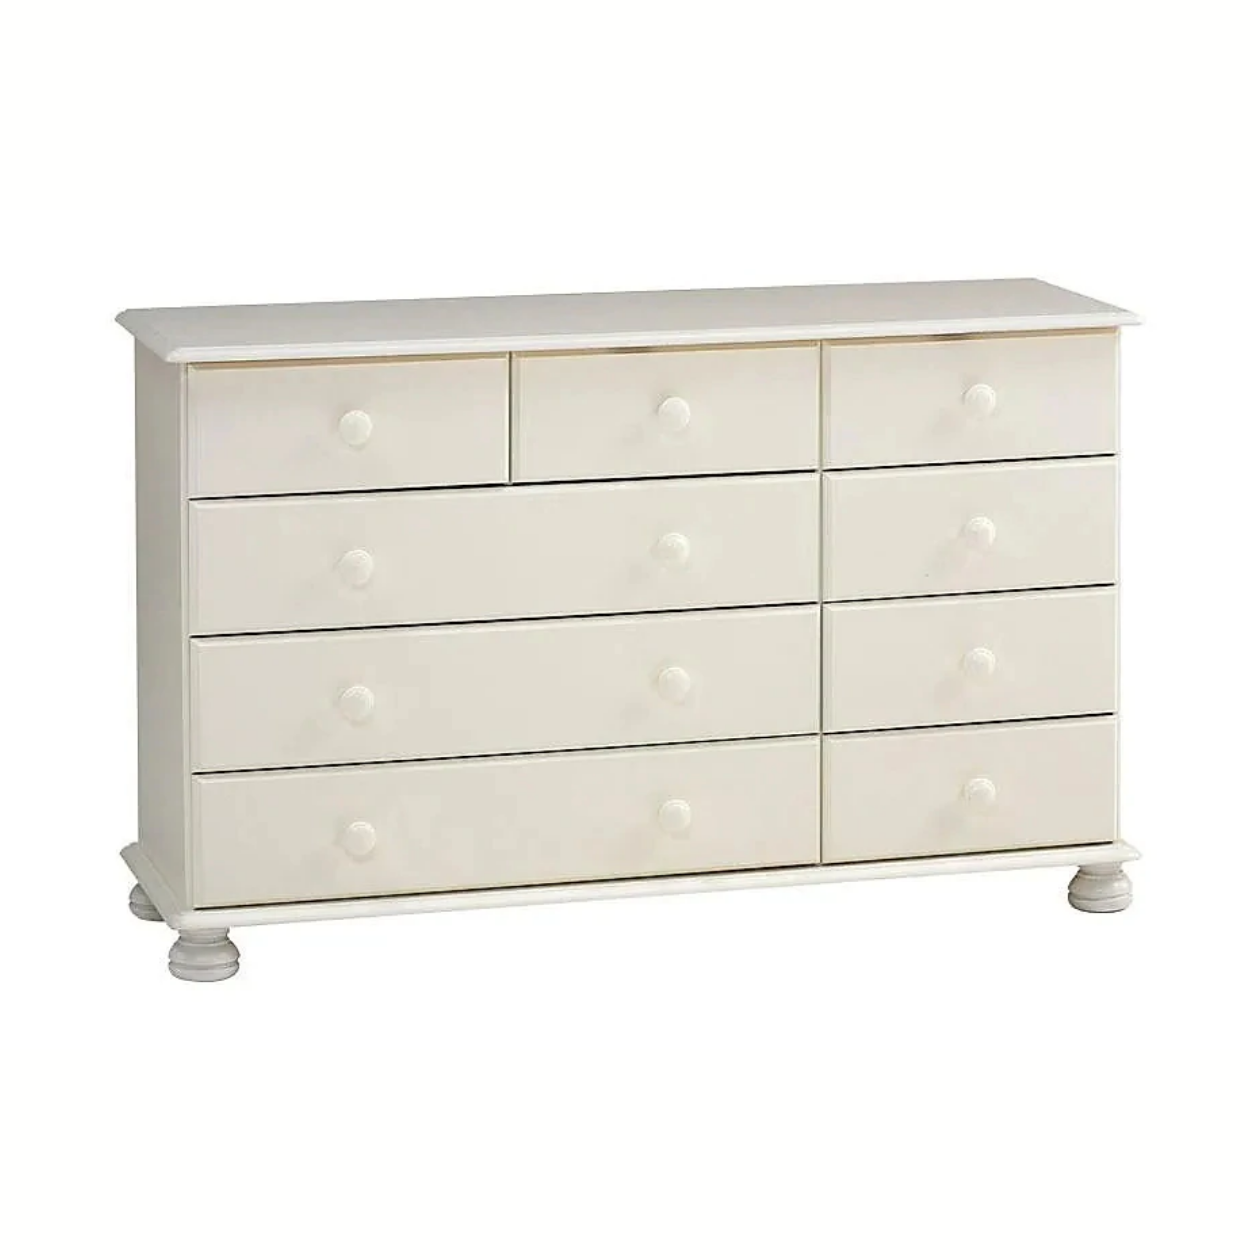 Chest of Drawers White 9 Drawer Chest of Drawers